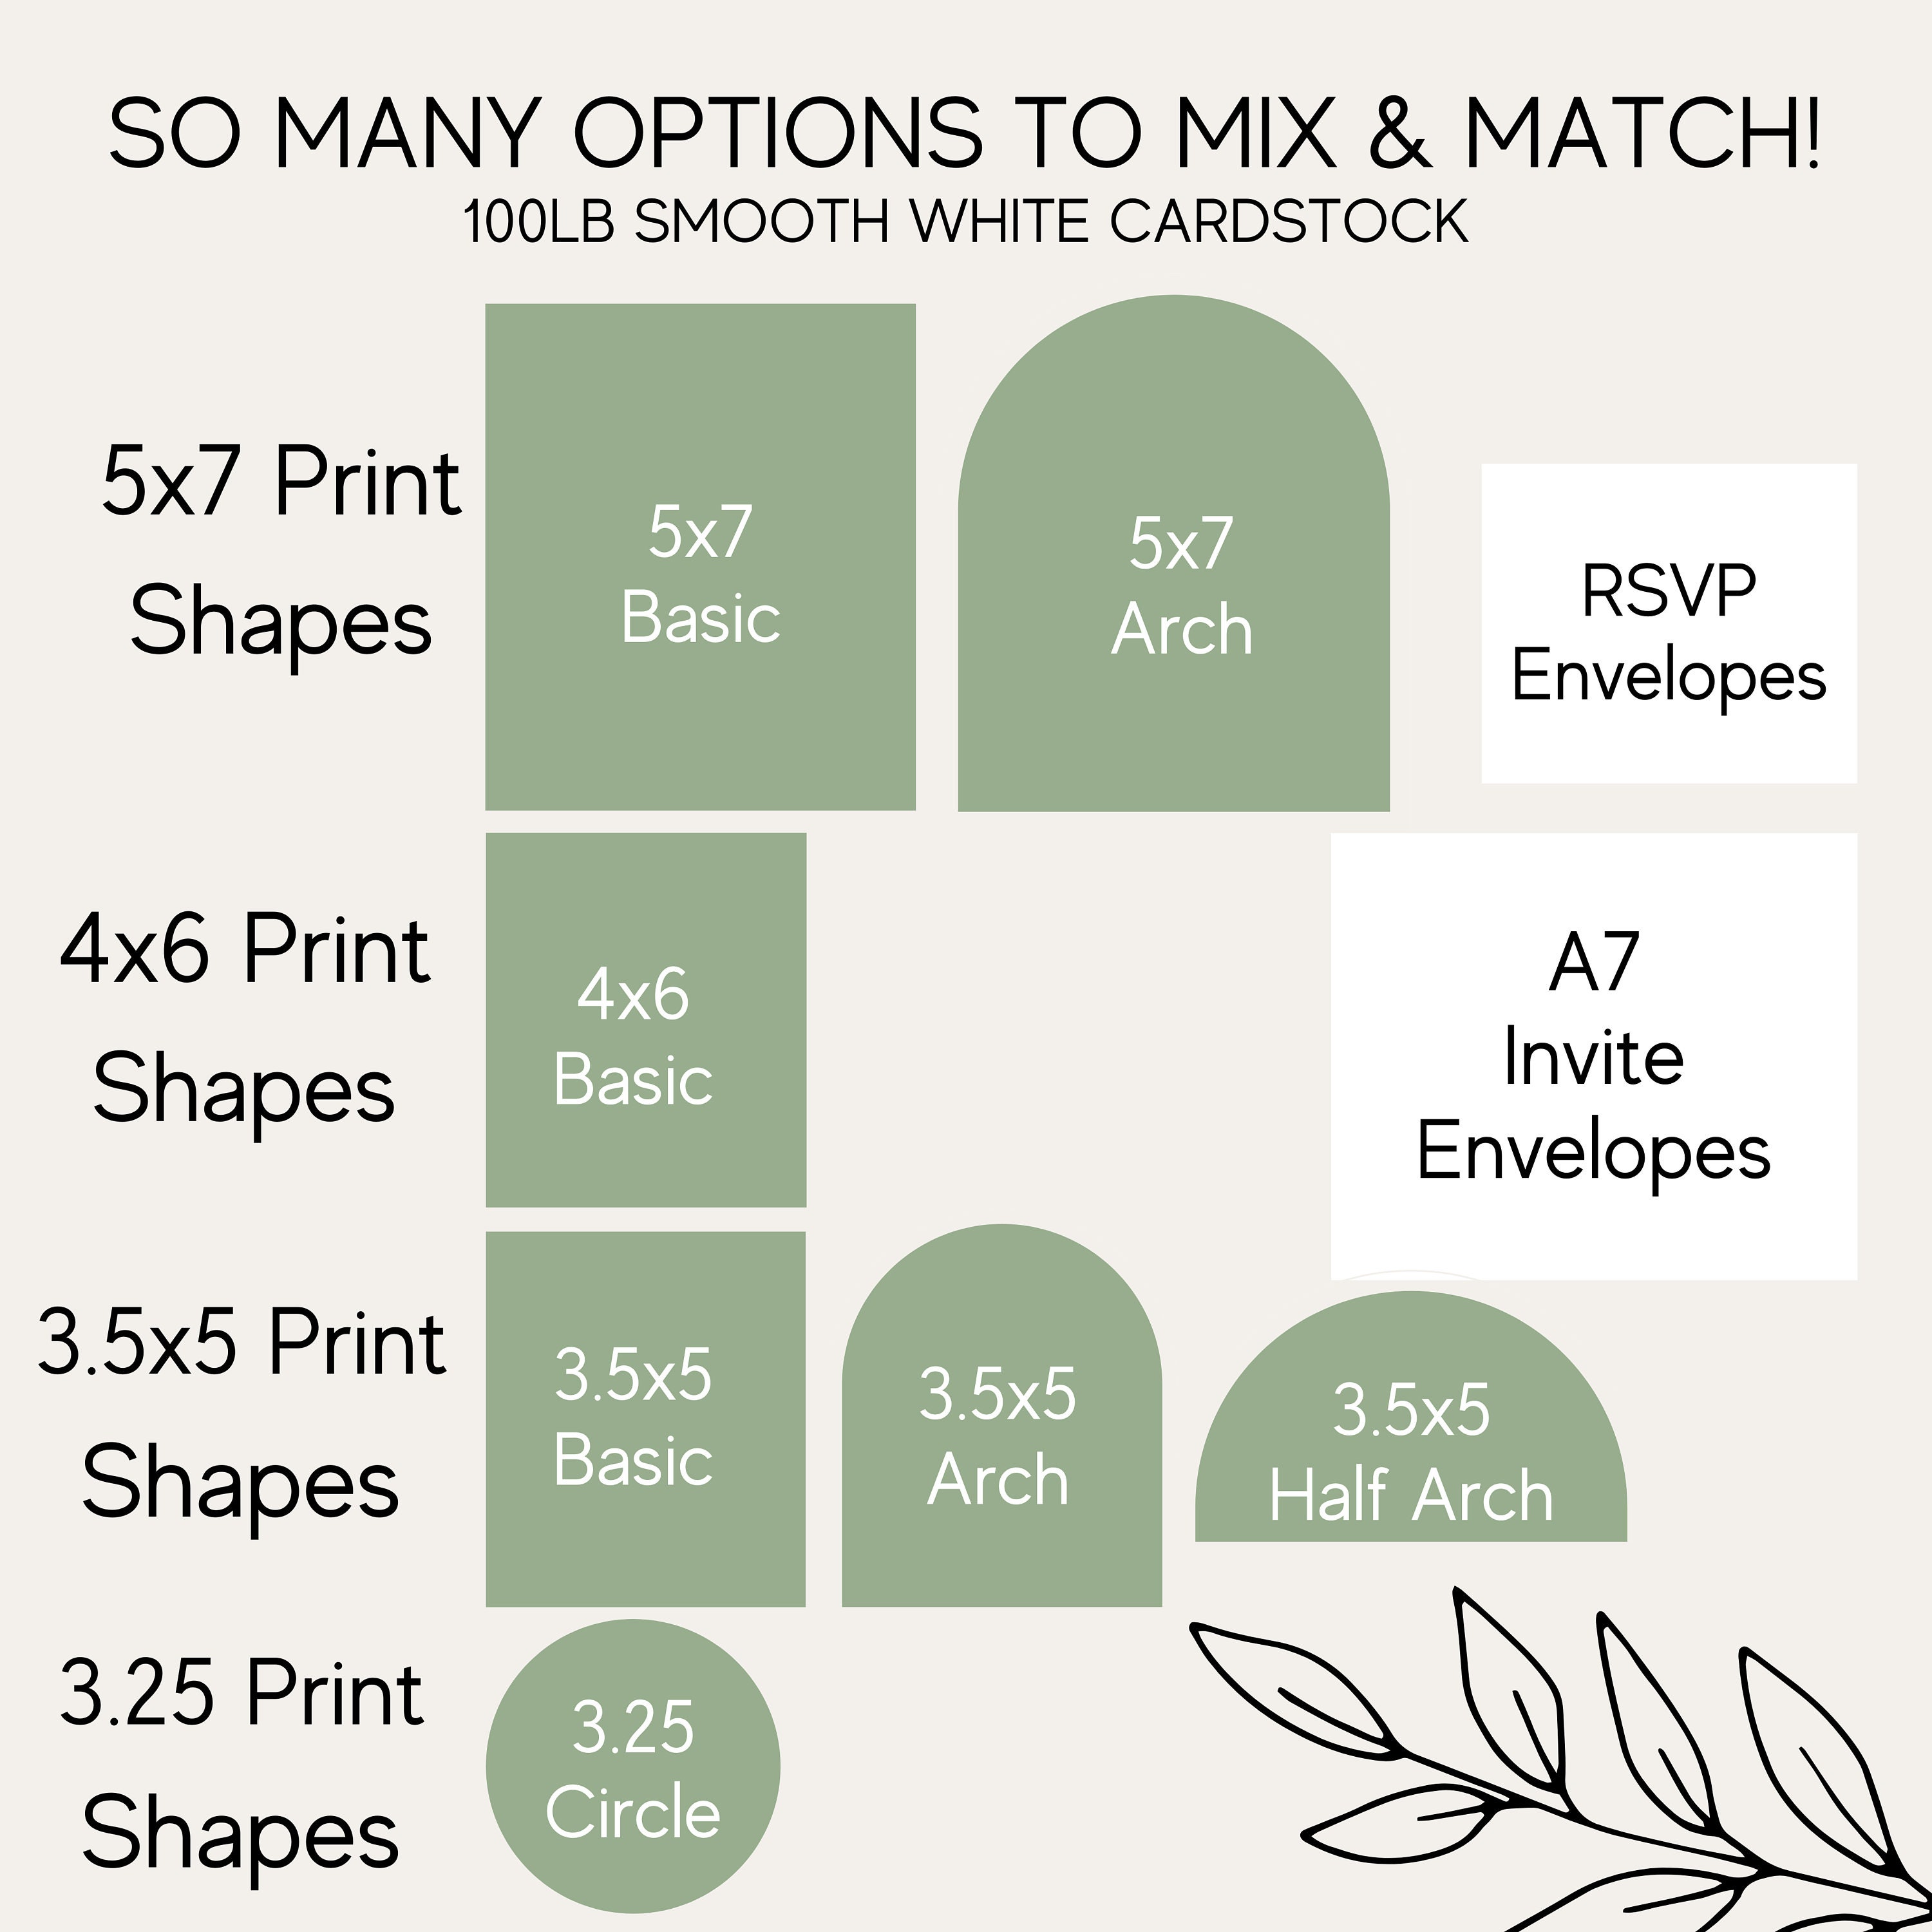 Custom 5x7 2 Sided Press Printed Cardstock - set of 25 - PhotoSynthesis